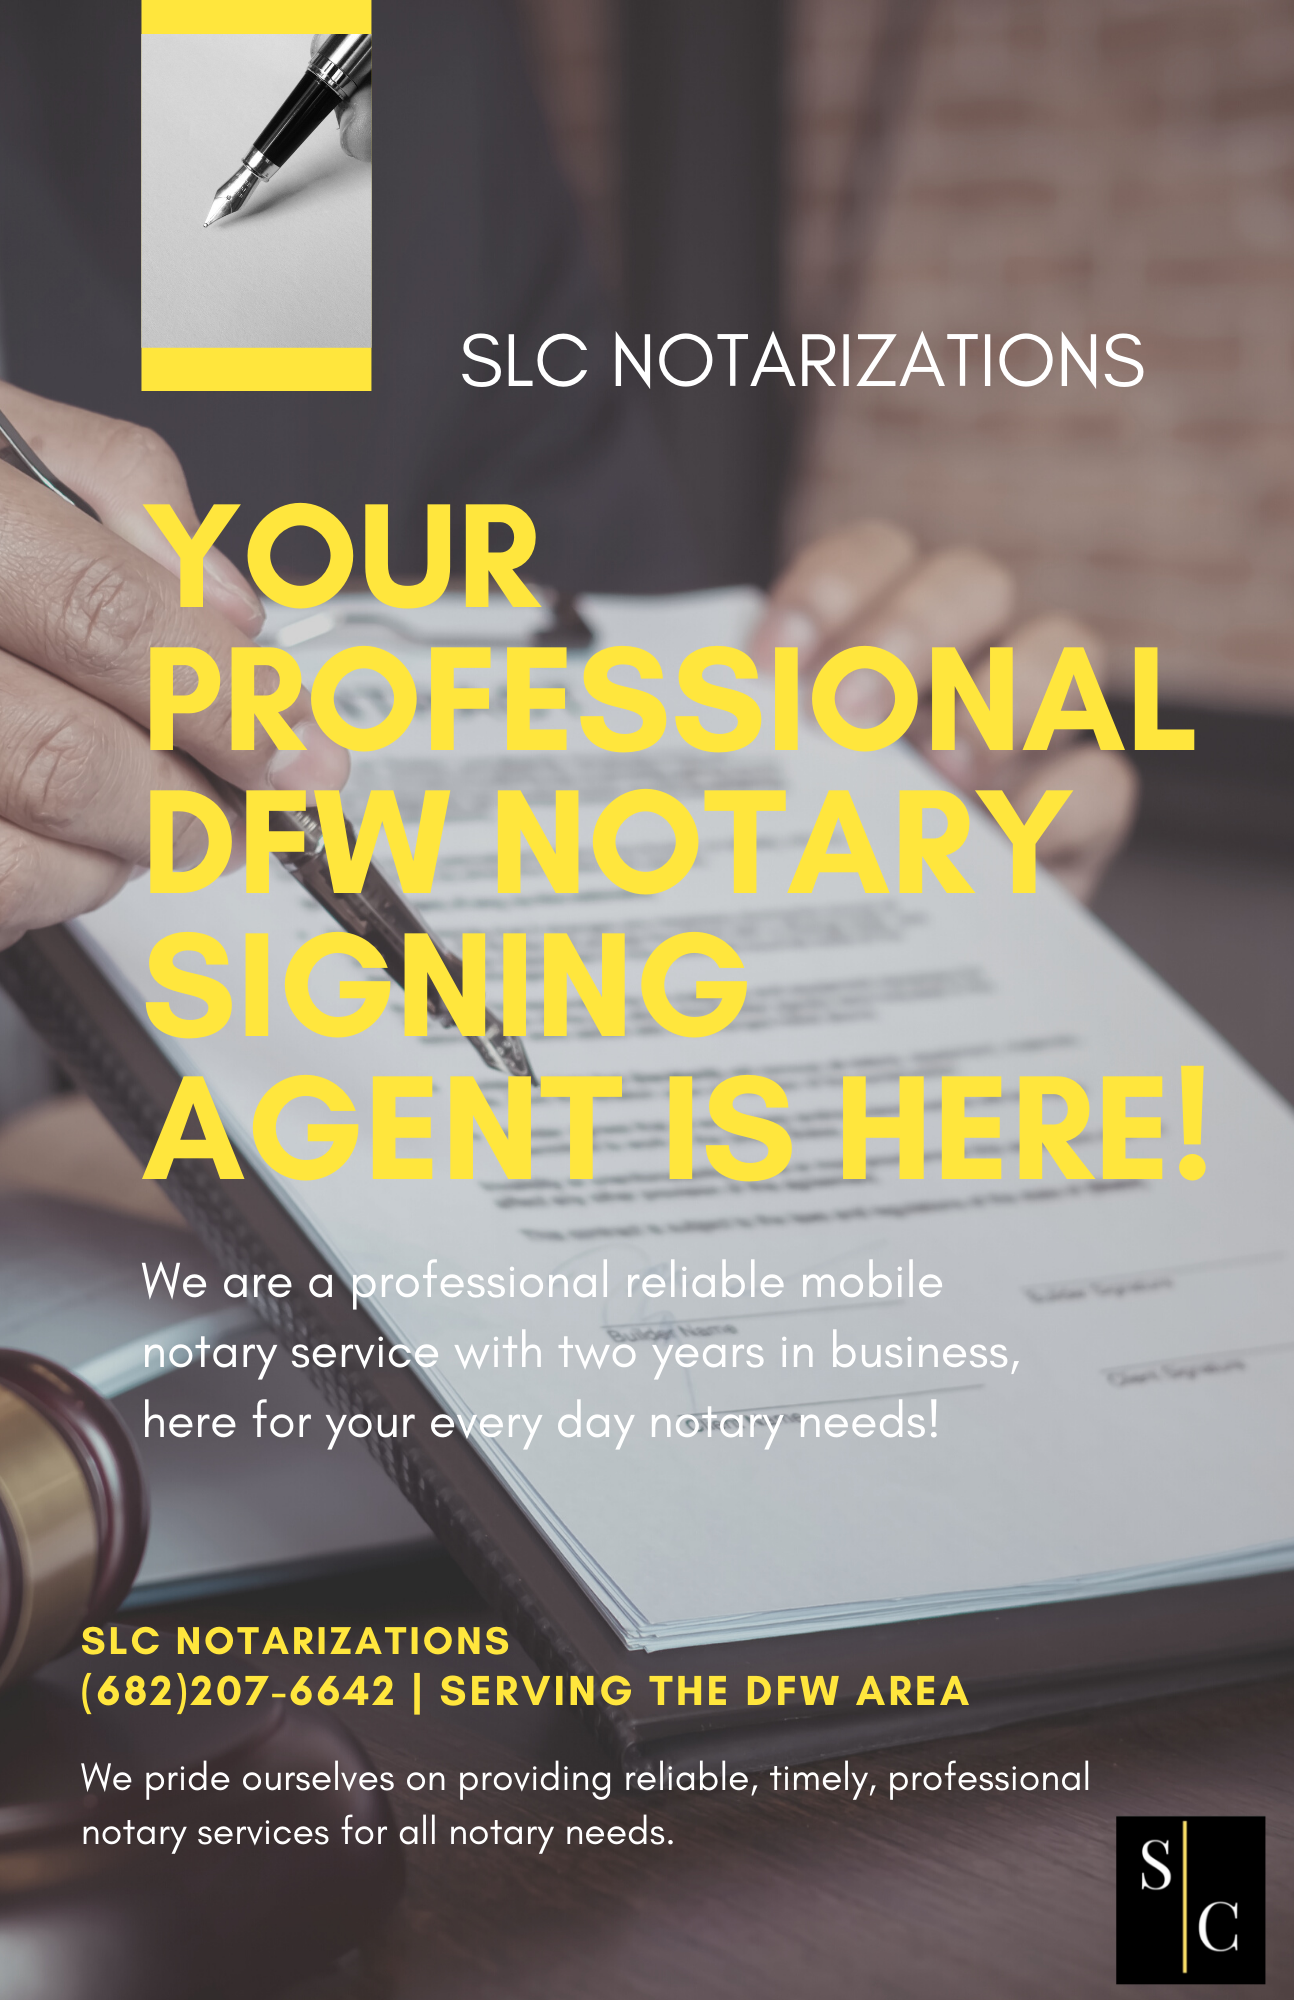 Mobile notary